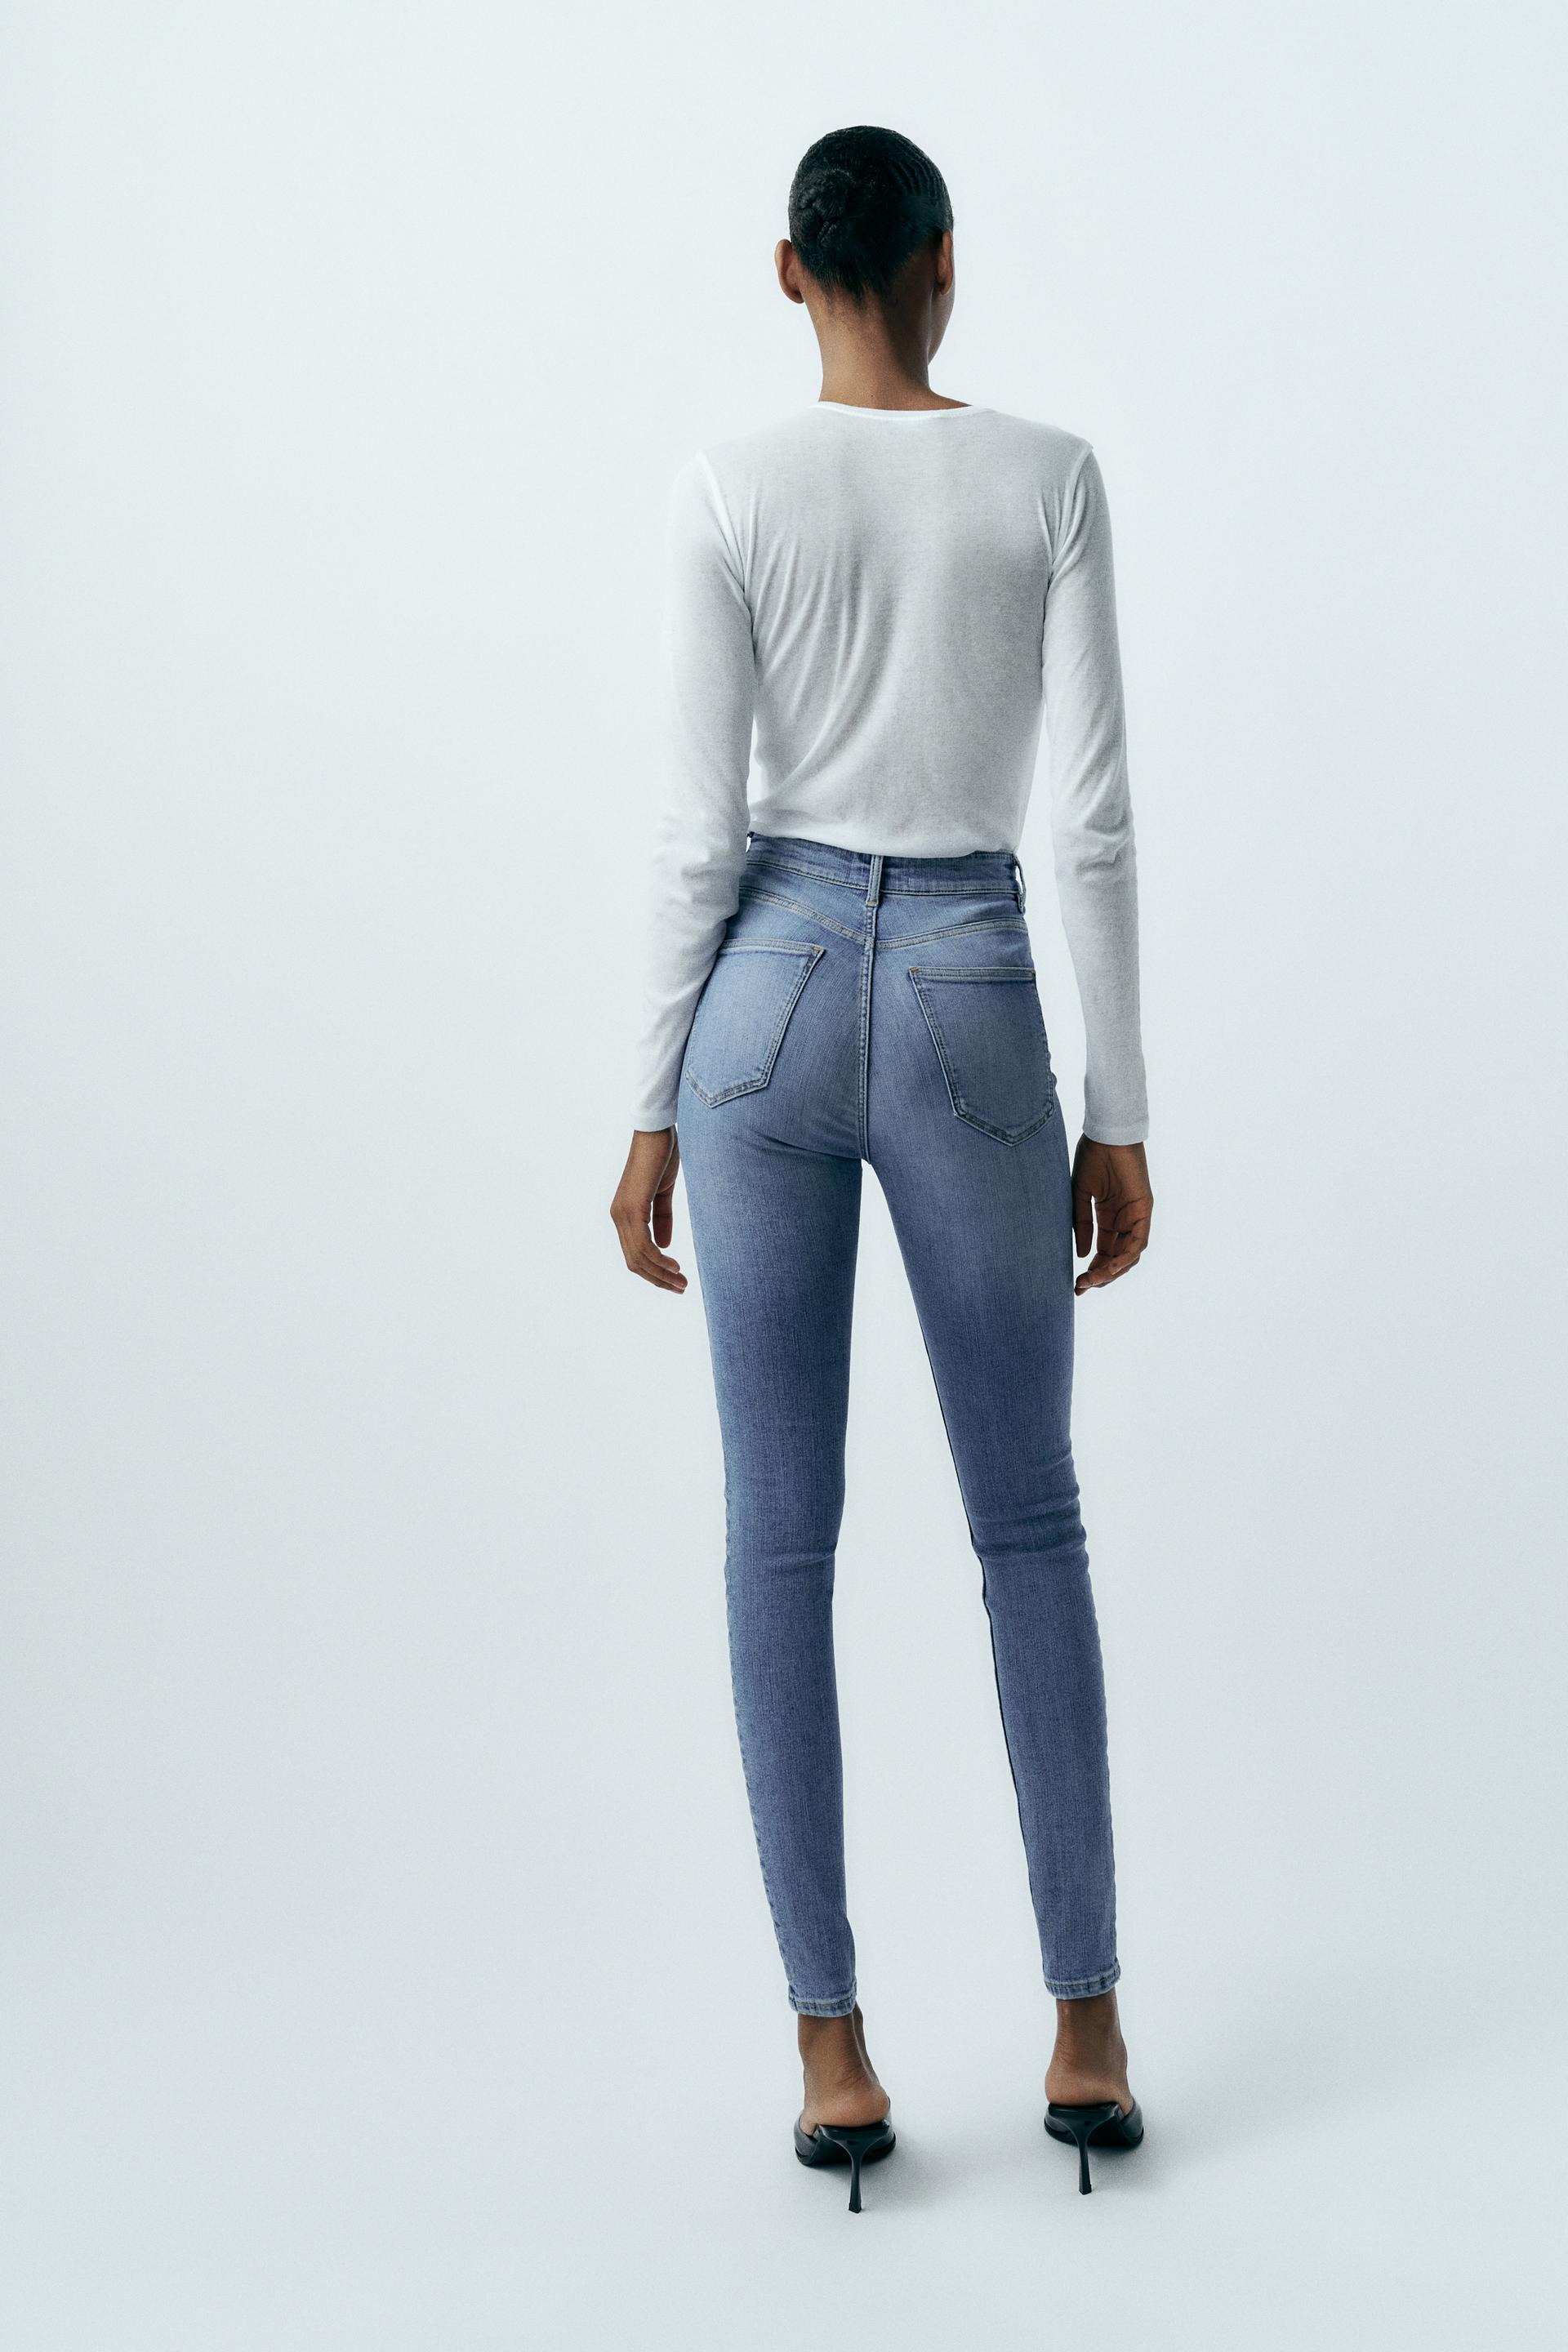 Super Skinny High Jeans - Gris denim oscuro - MUJER